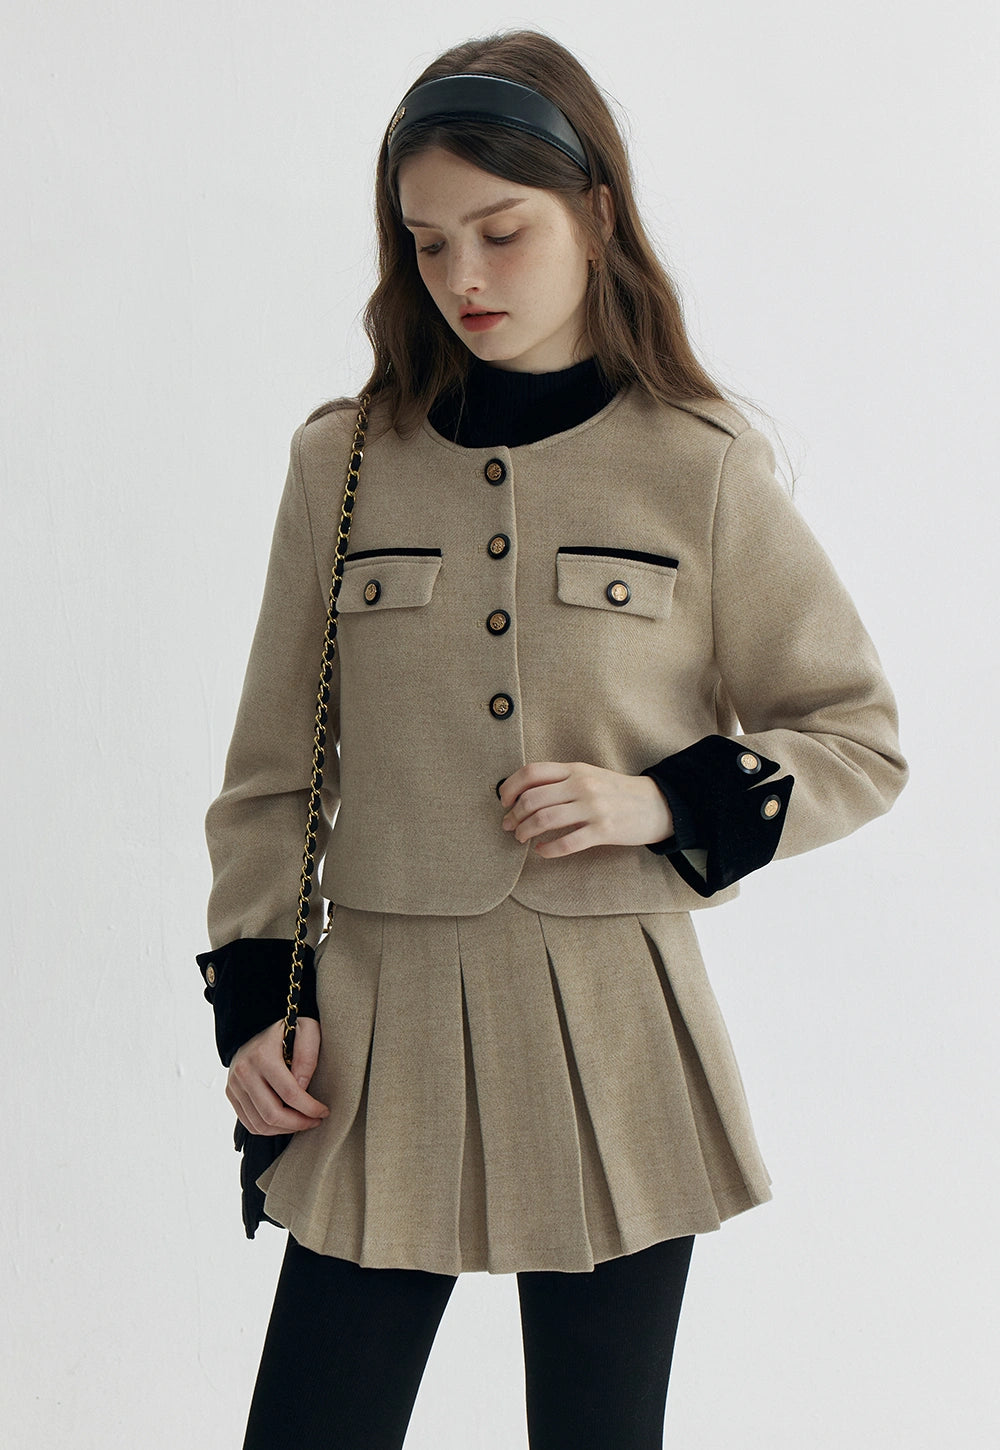 Women's 2-Piece Set: Military-Inspired Button-Up Jacket and Pleated Skirt